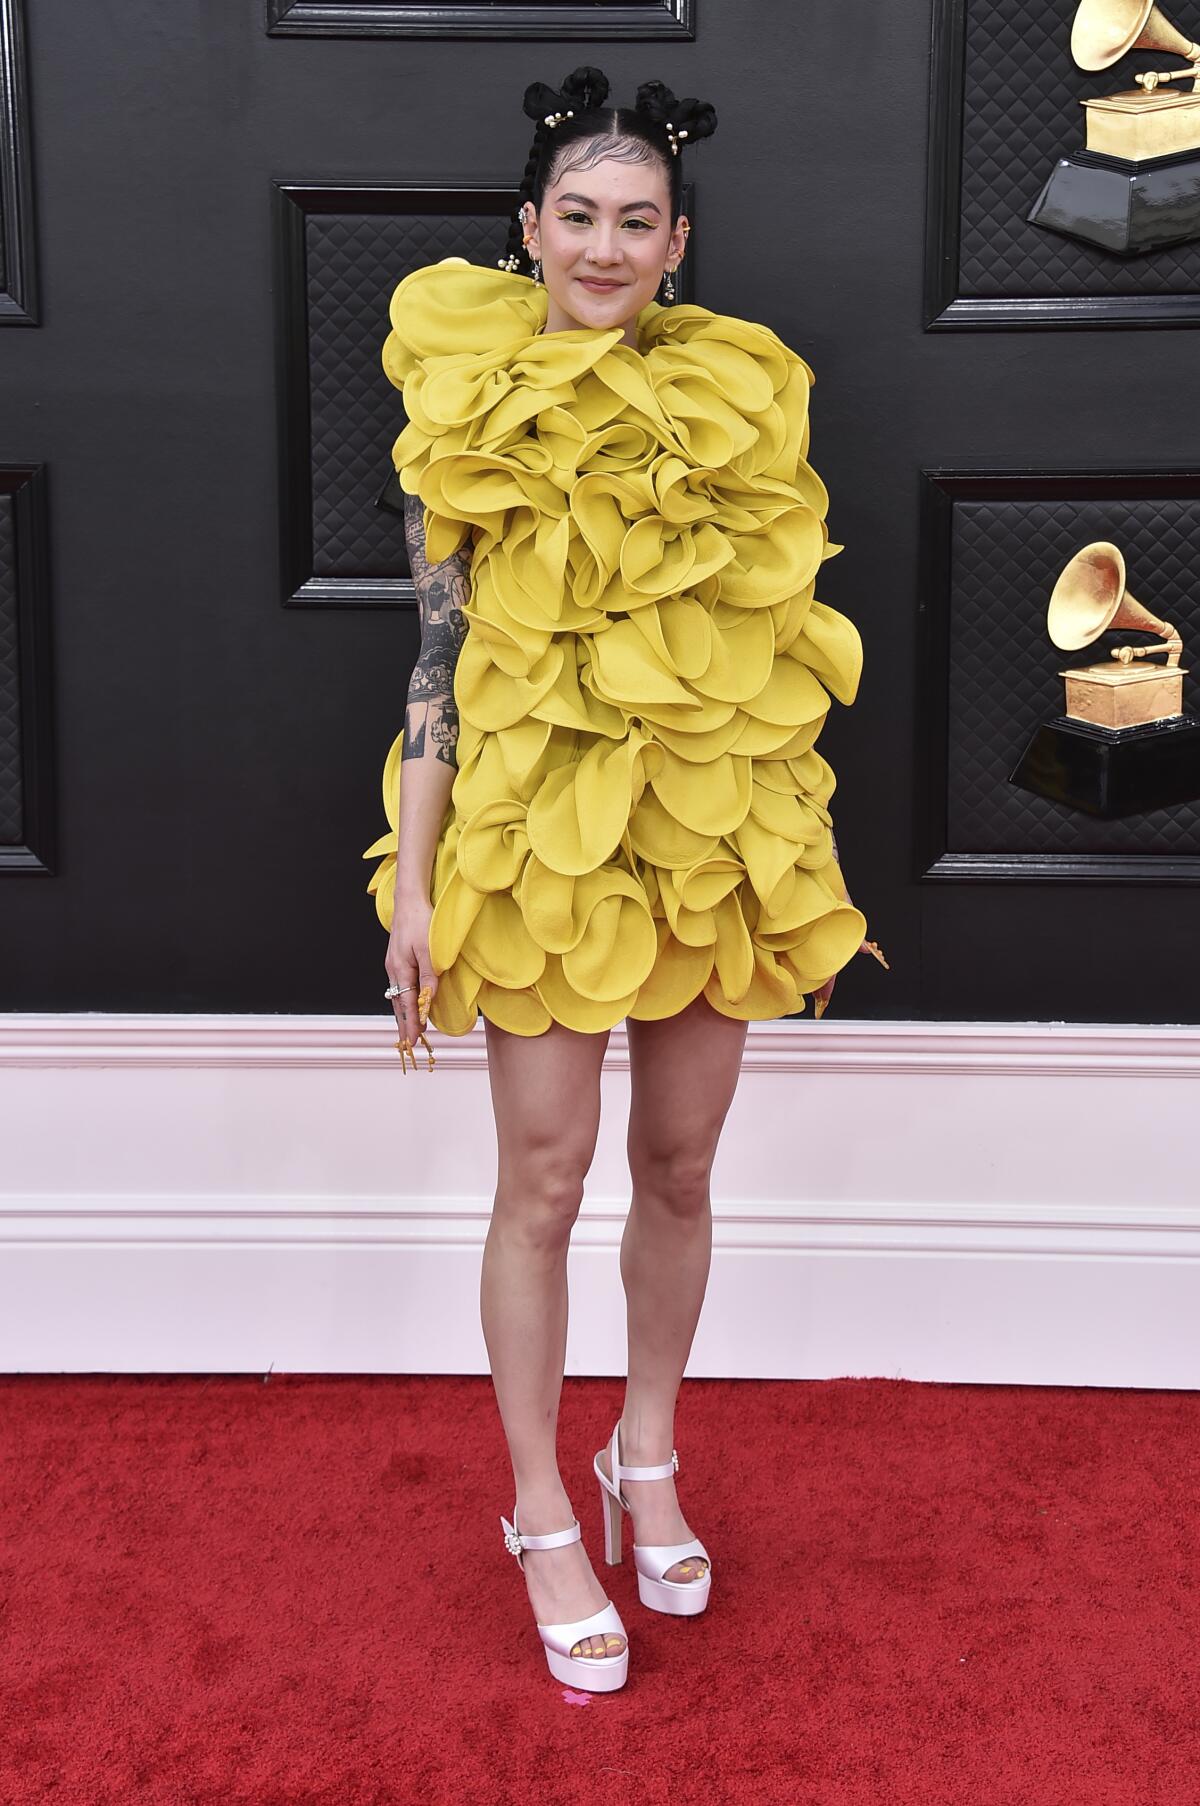 Japanese Breakfast arrives at the 64th Grammy Awards.